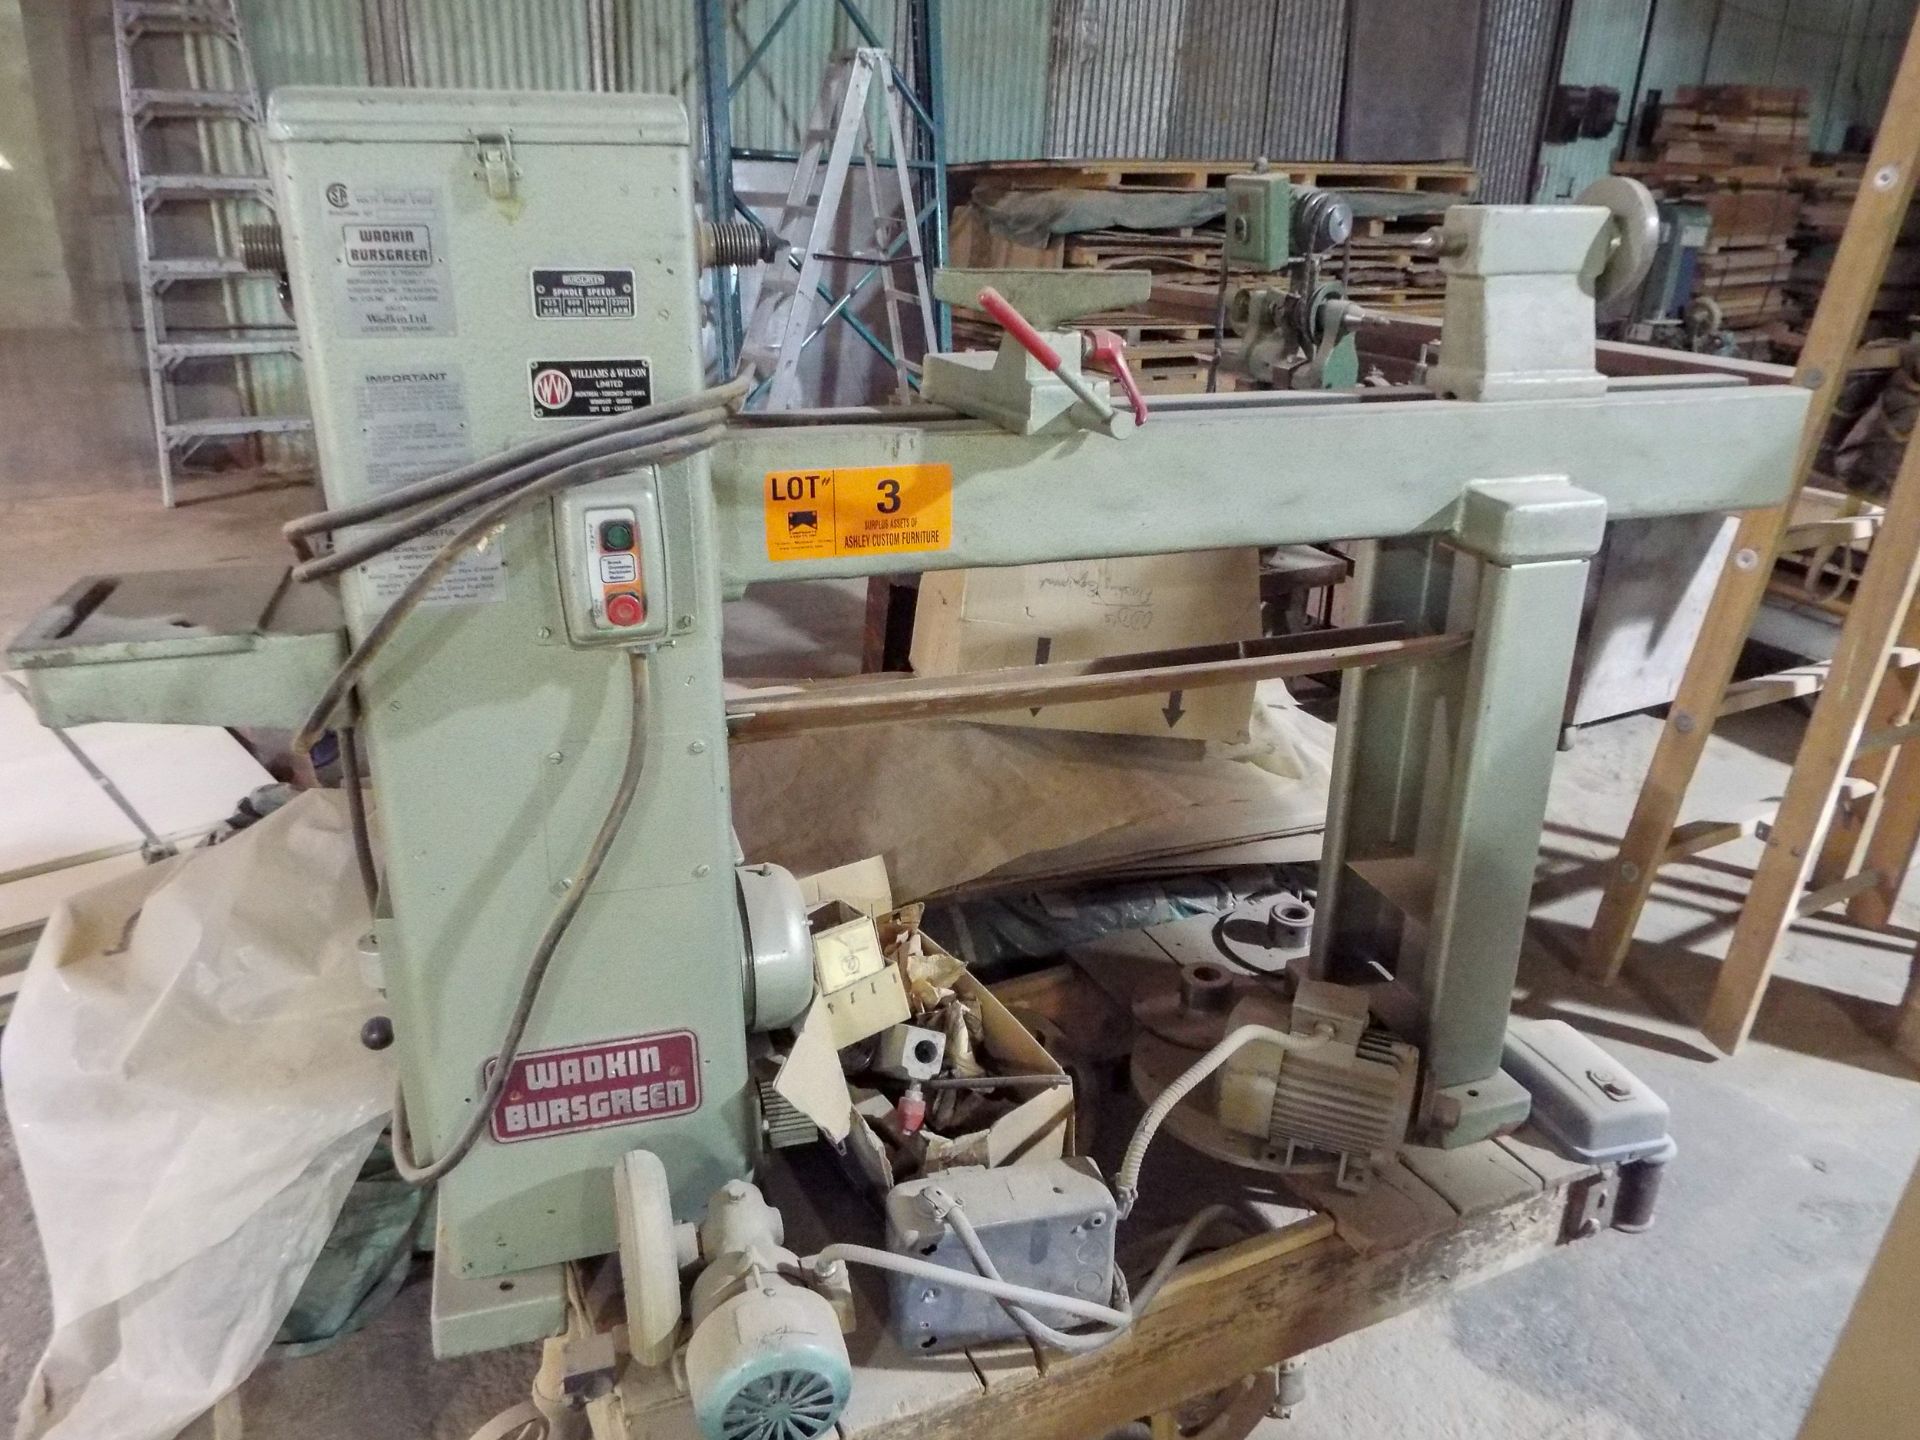 WADKIN BURSGREEN CONVENTIONAL WOOD TURNING LATHE WITH, 1.5 HP, 12" SWING, 38" BETWEEN CENTERS,